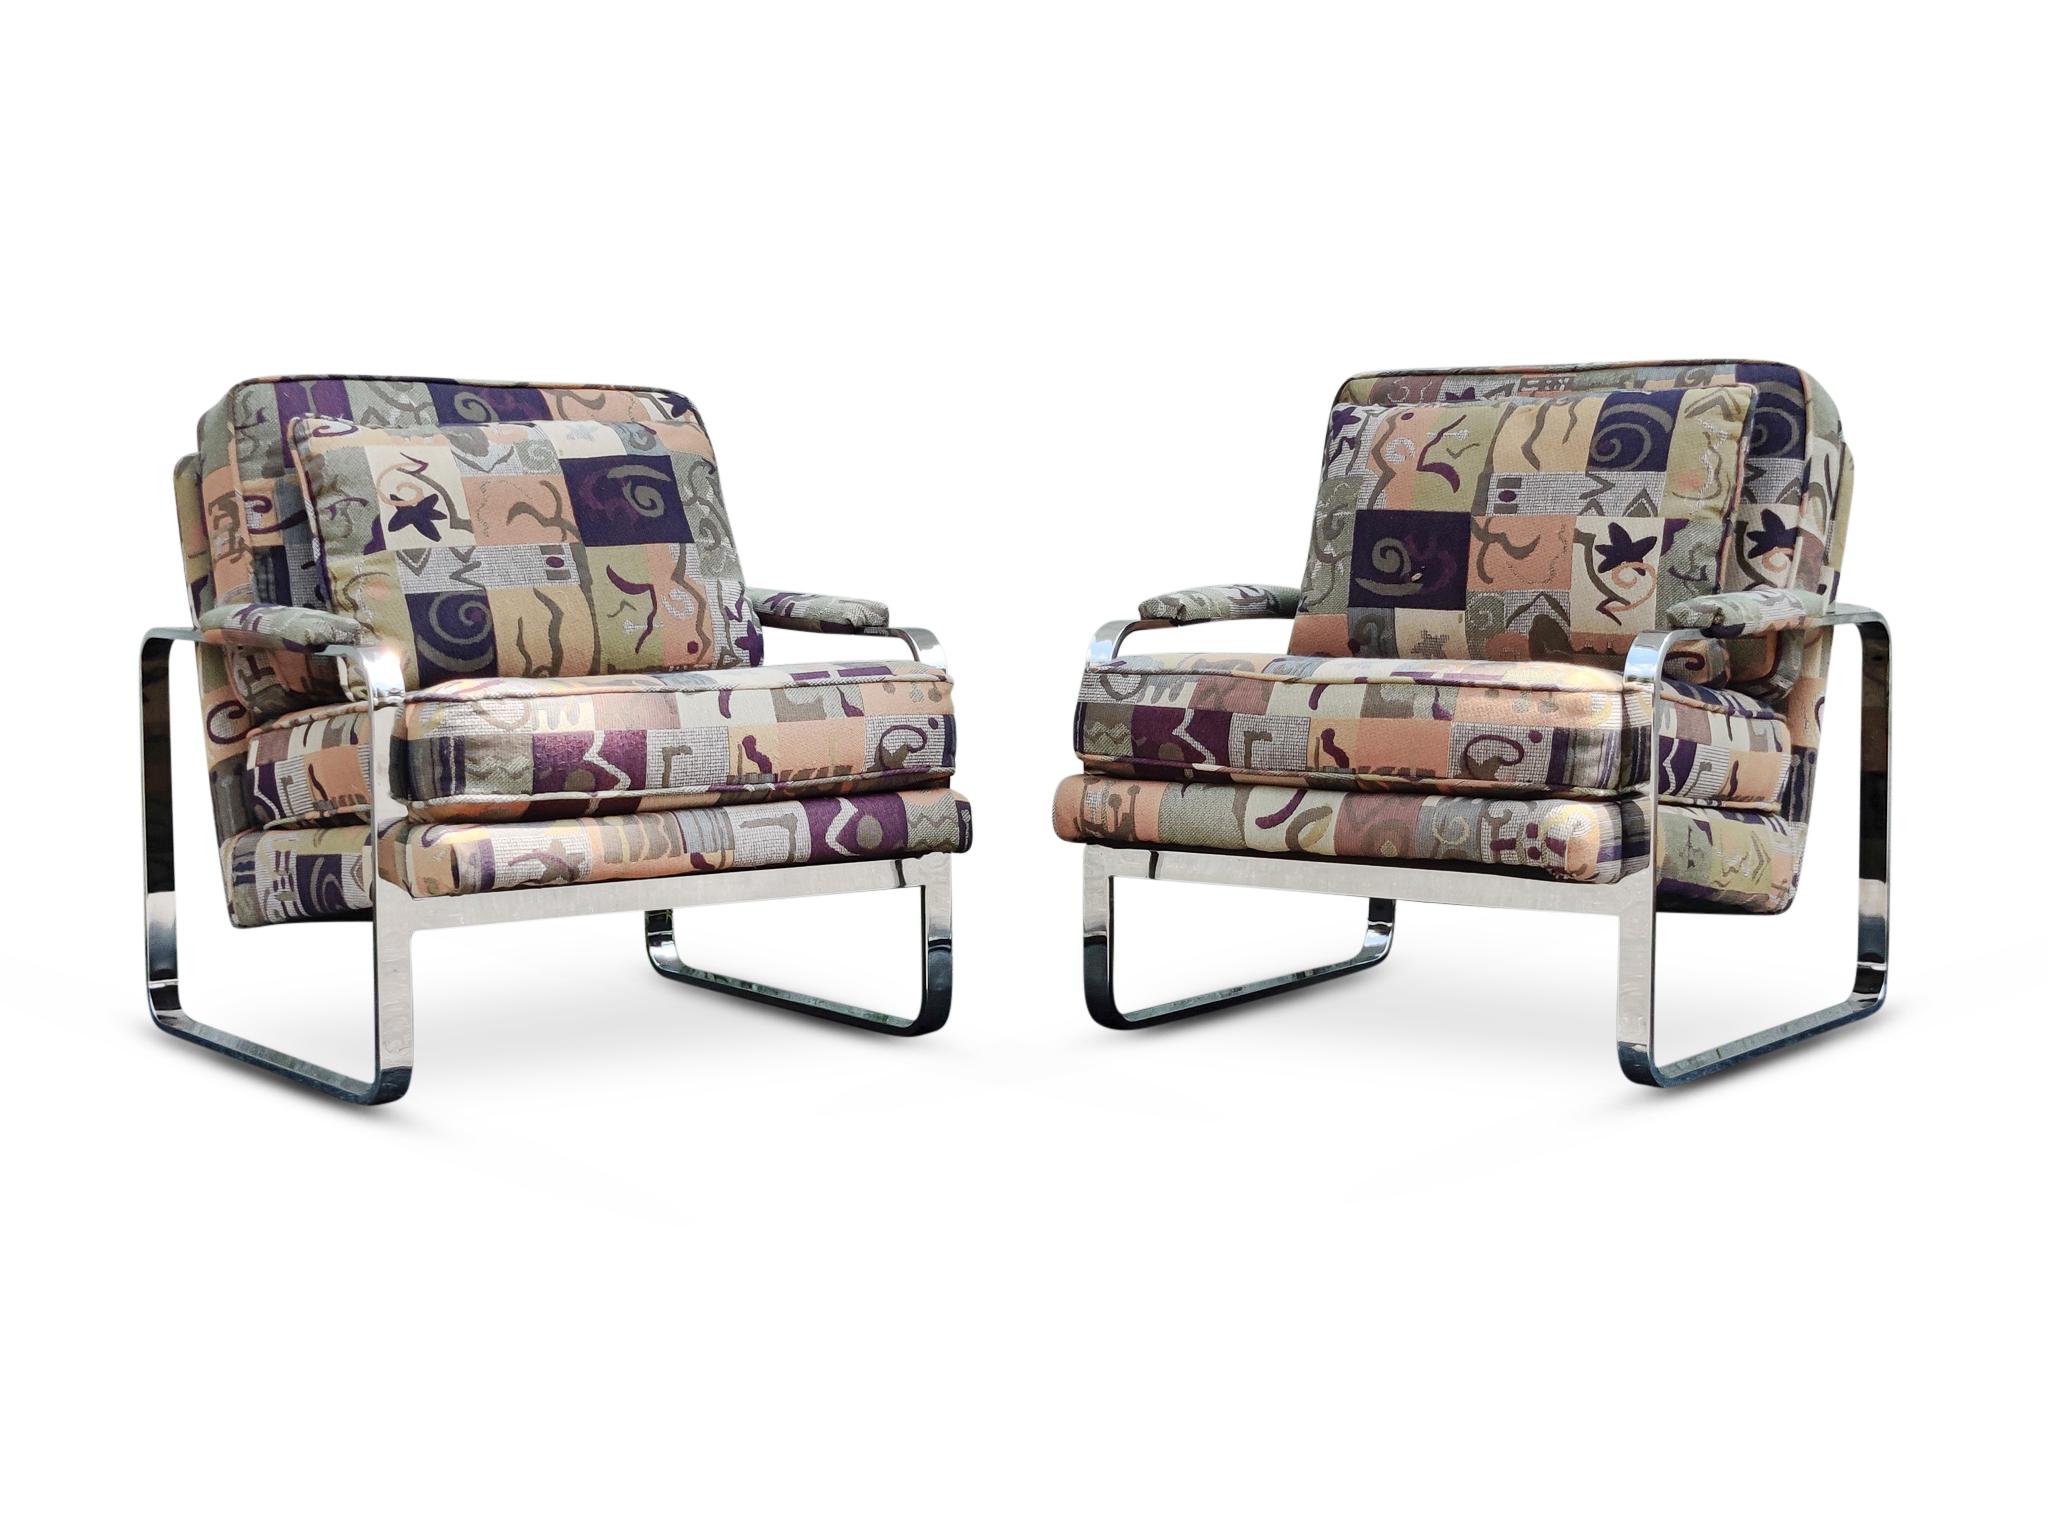 A handsome pair of low and wide loungers in the iconic style of Milo Baughman, and by the quality top quality manufacturer, Bernhardt. This 1970s pair of club chairs was likely recovered in the mid 90s. The chrome frames are clean and bright. The